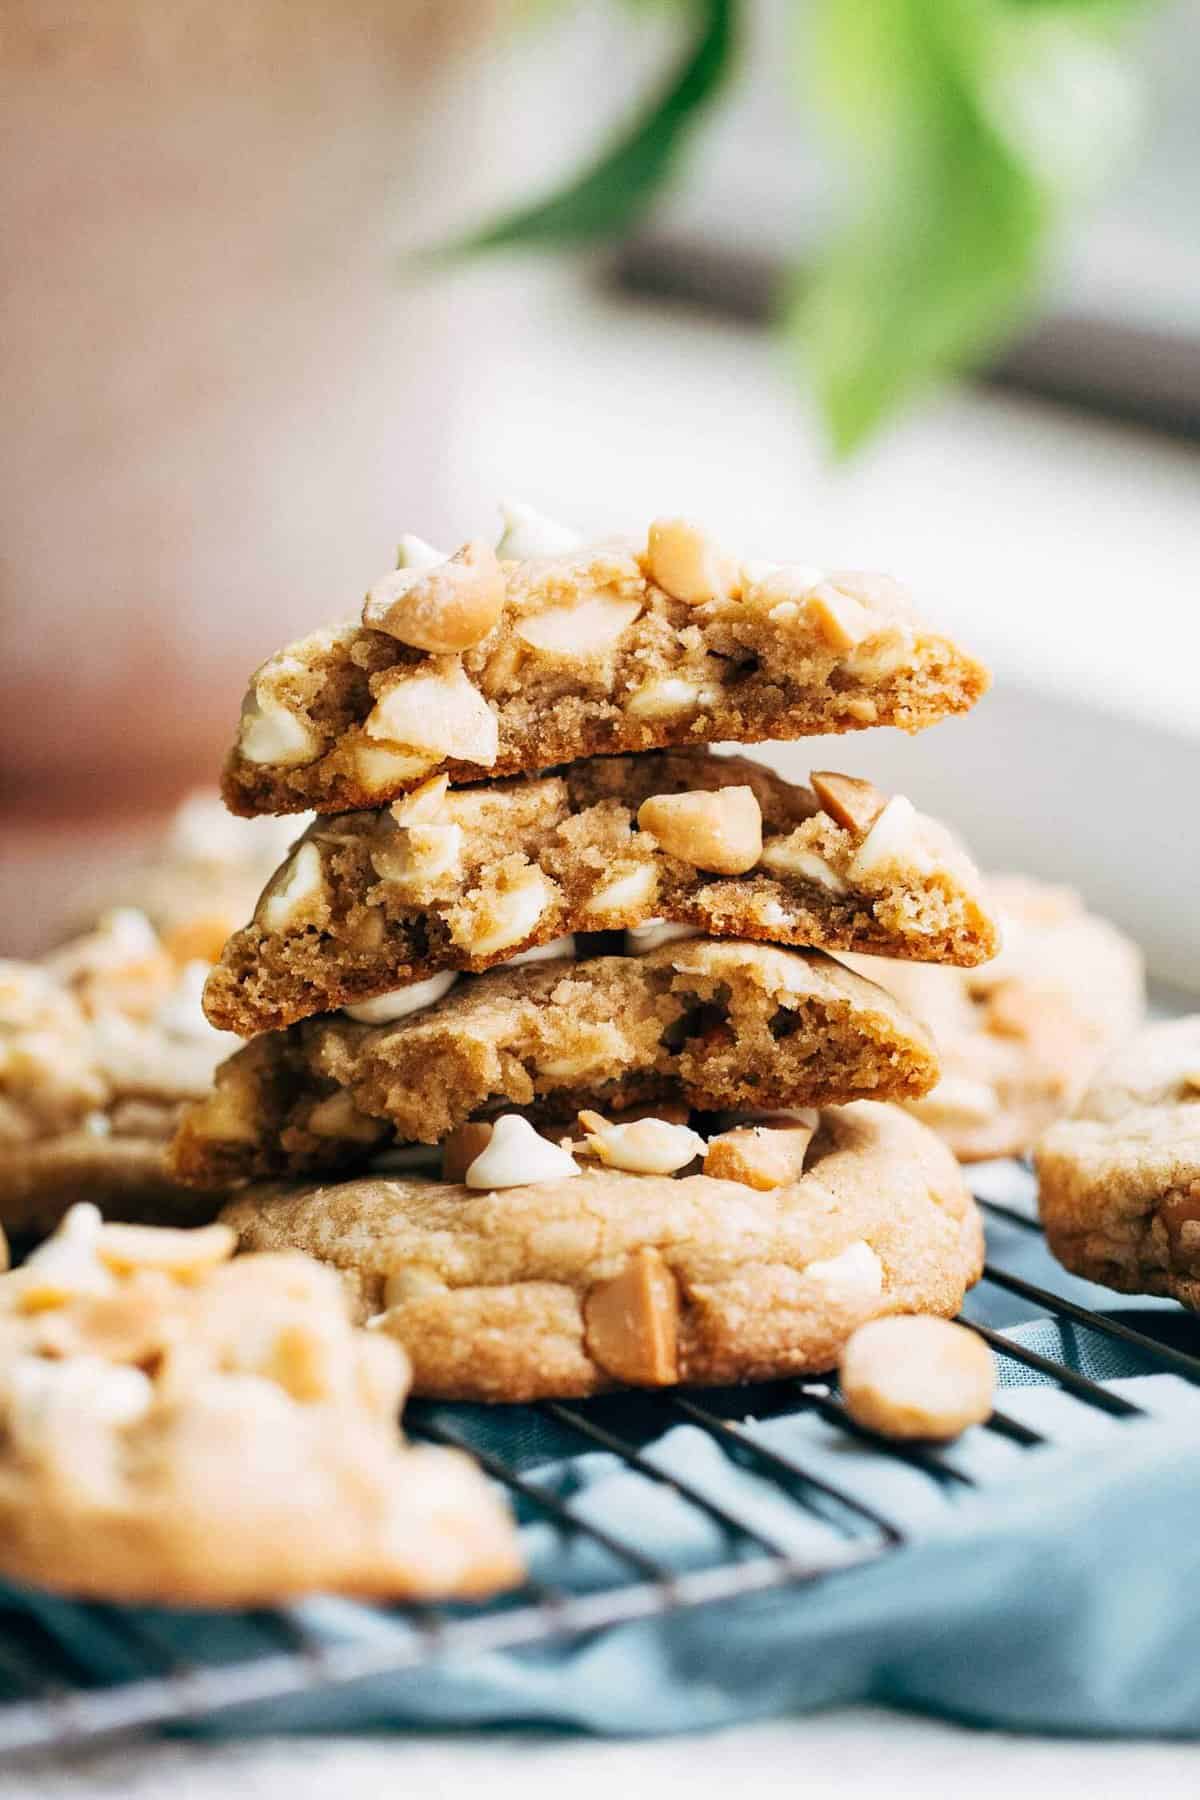 White Chocolate Macadamia Nut Cookies with Rubbermaid - Apriljwagner